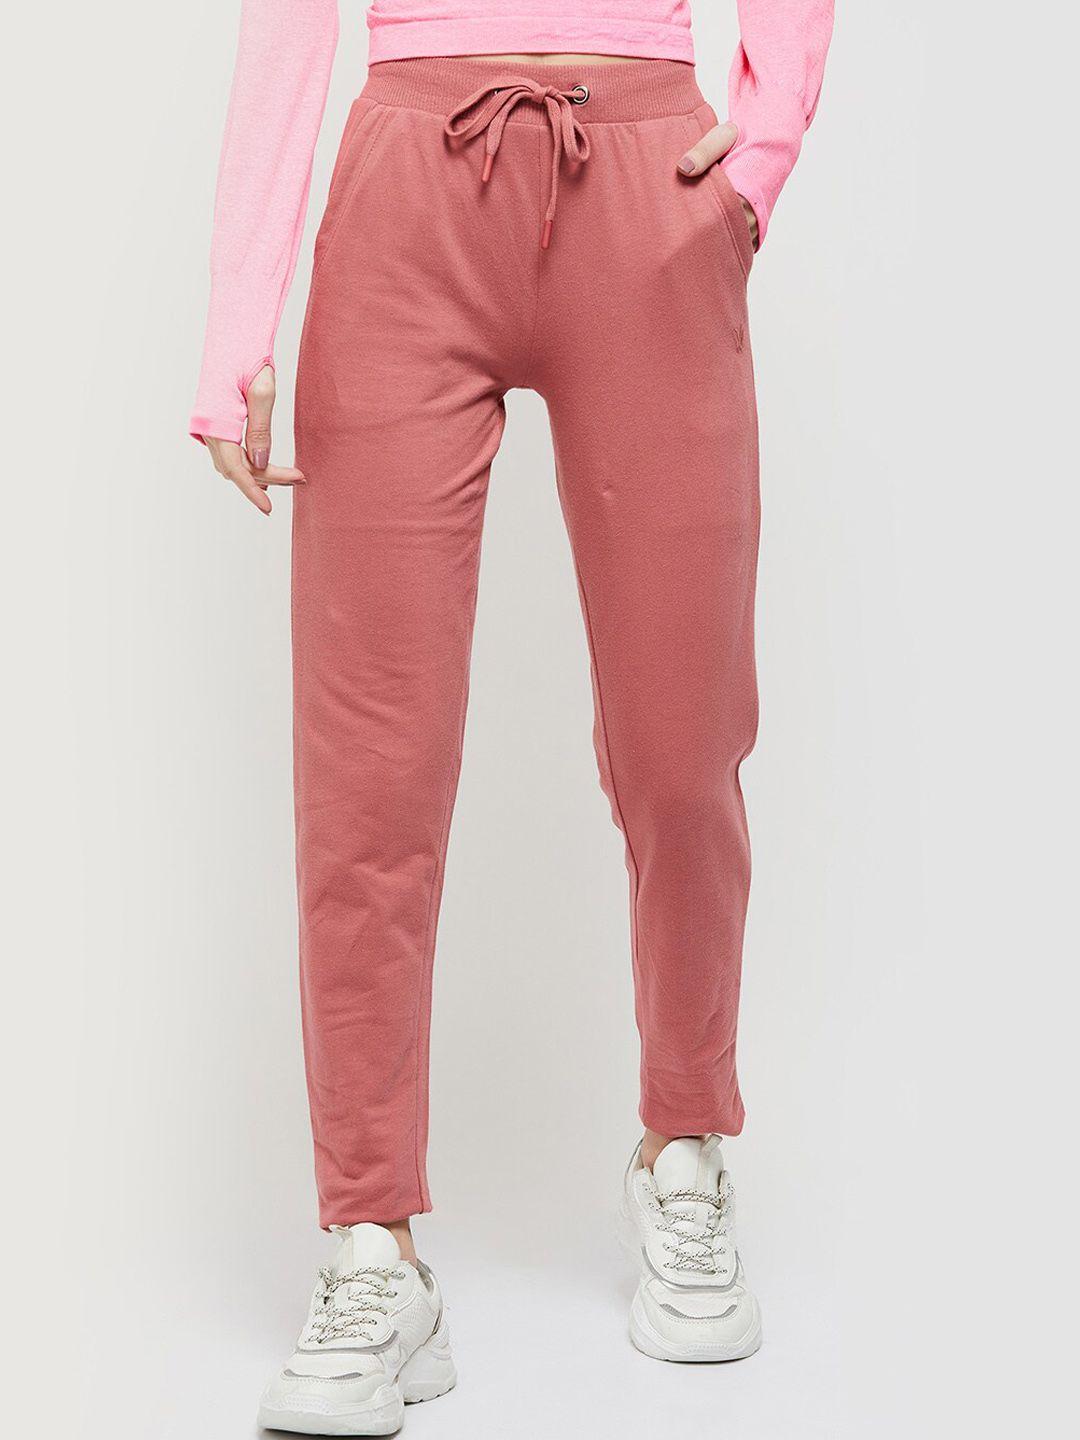 max women peach coloured solid cotton track pants